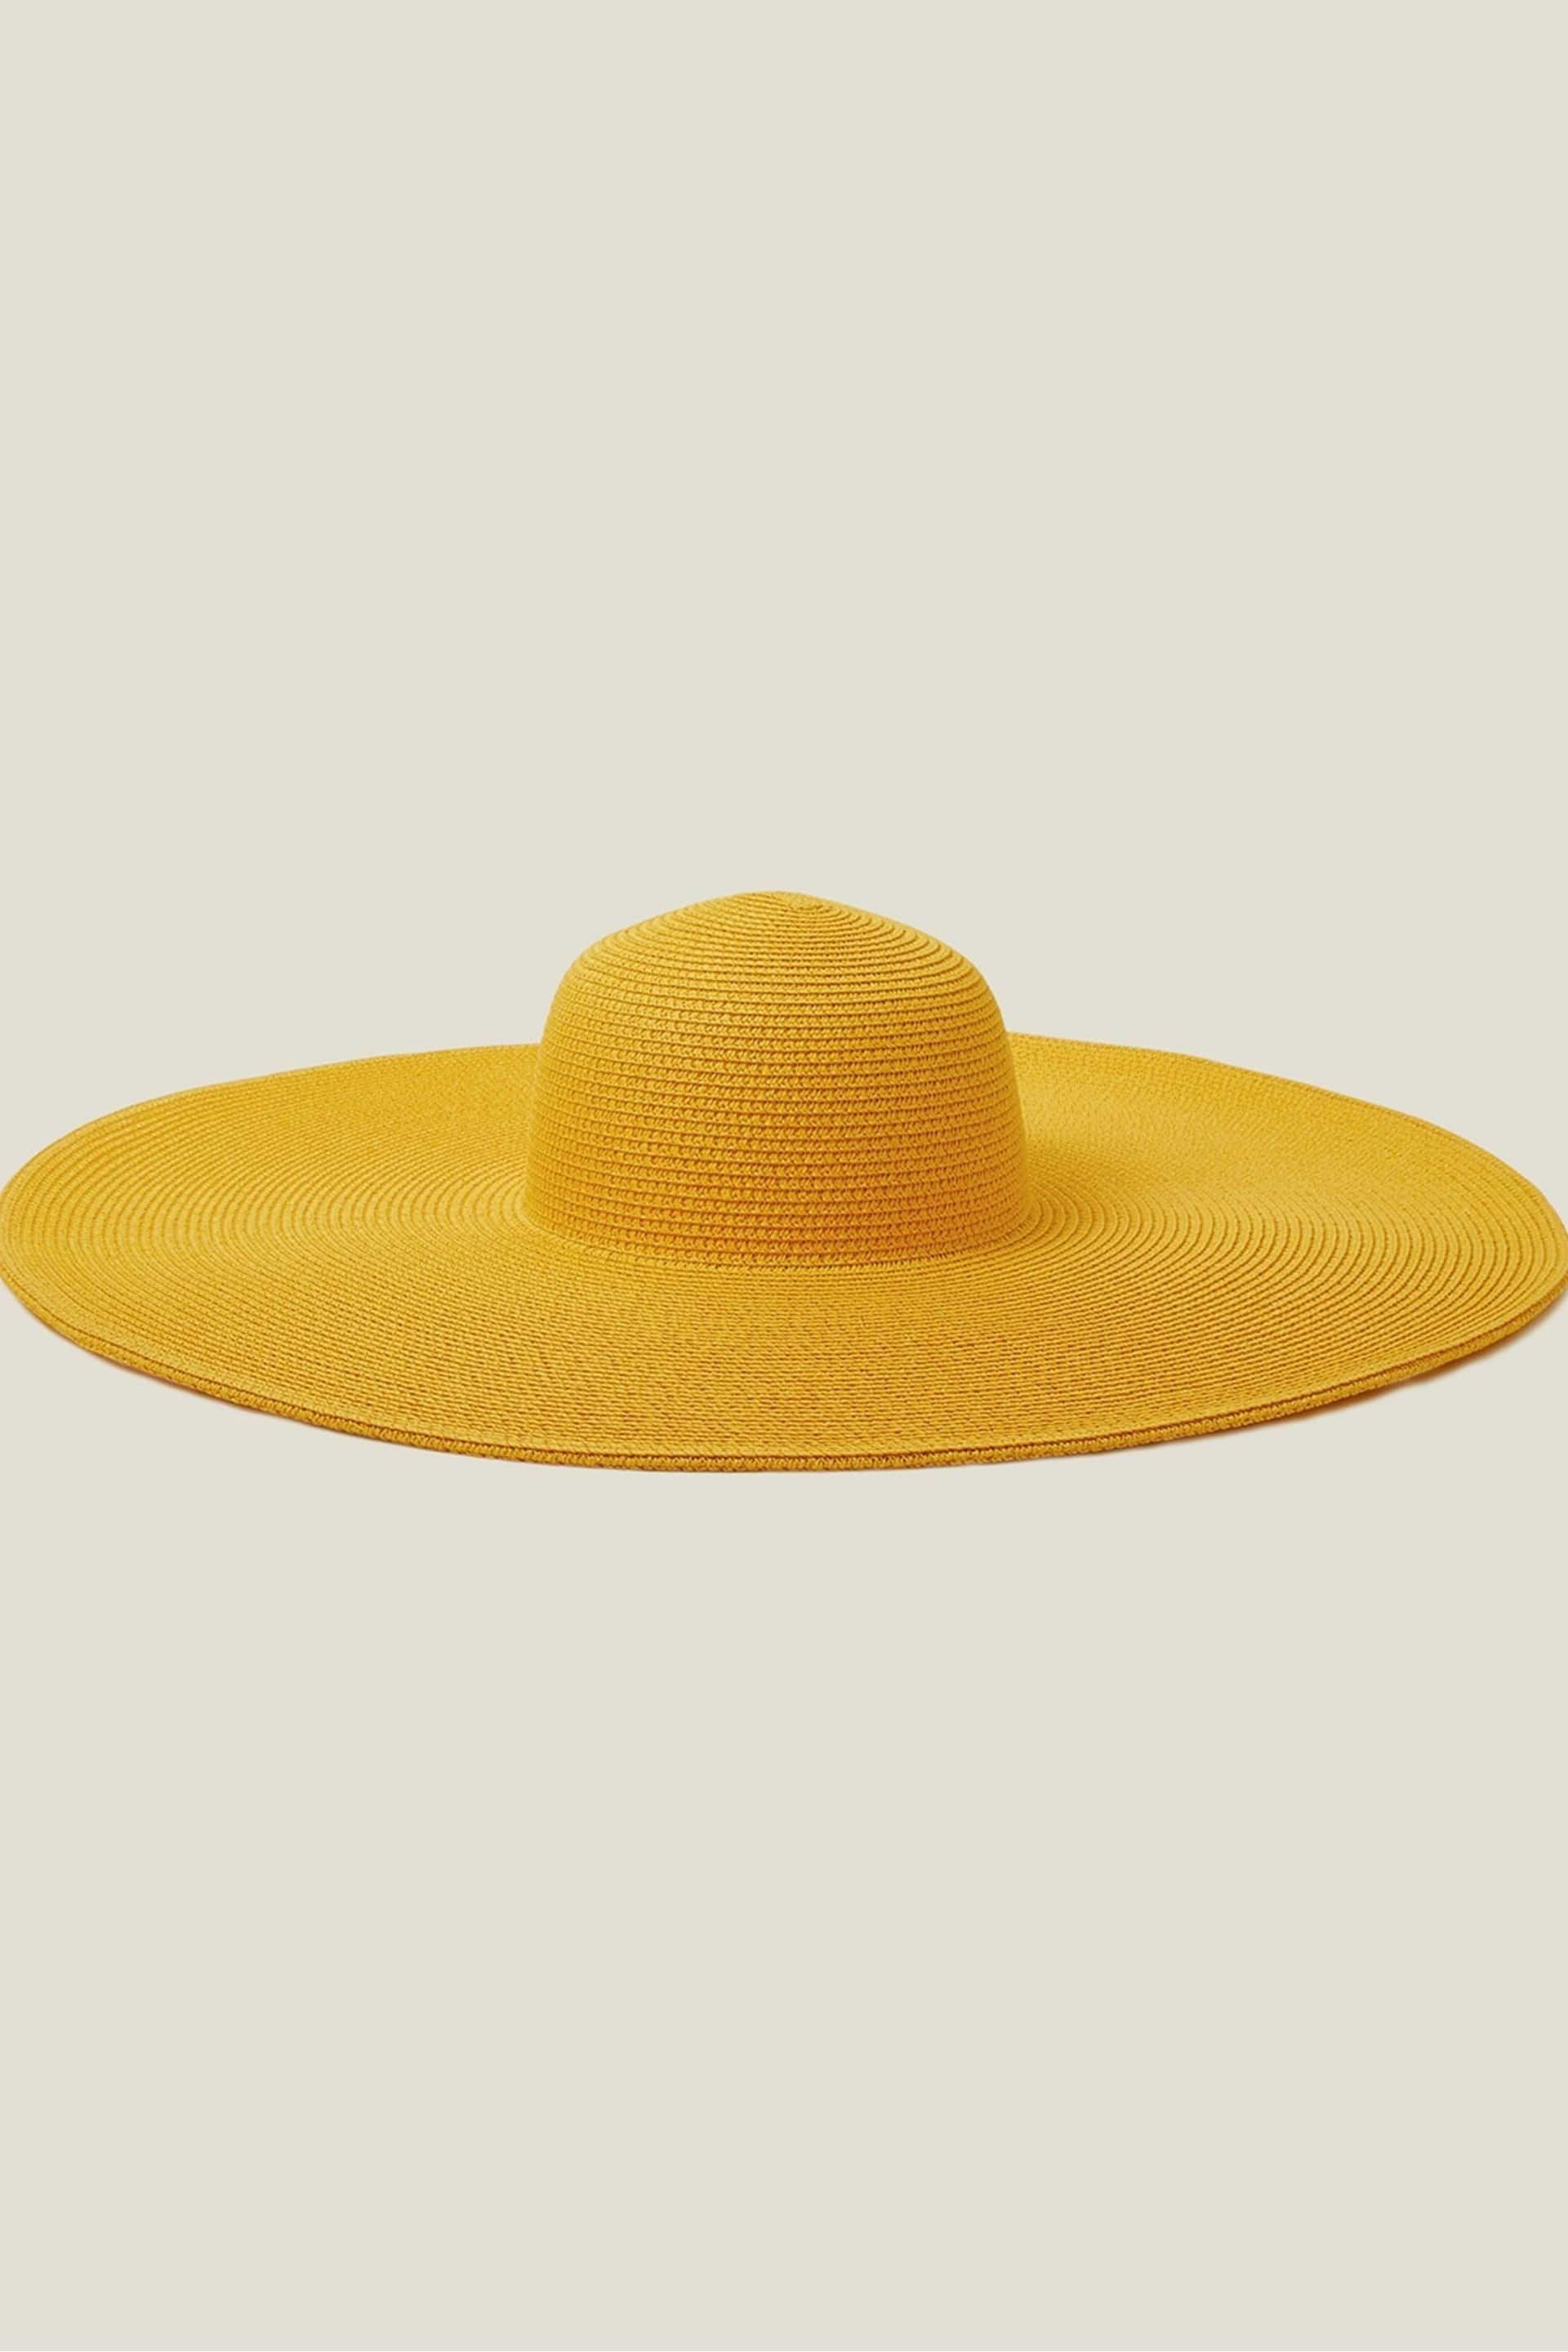 Accessorize Yellow Extra Large Floppy Hat - Image 2 of 3